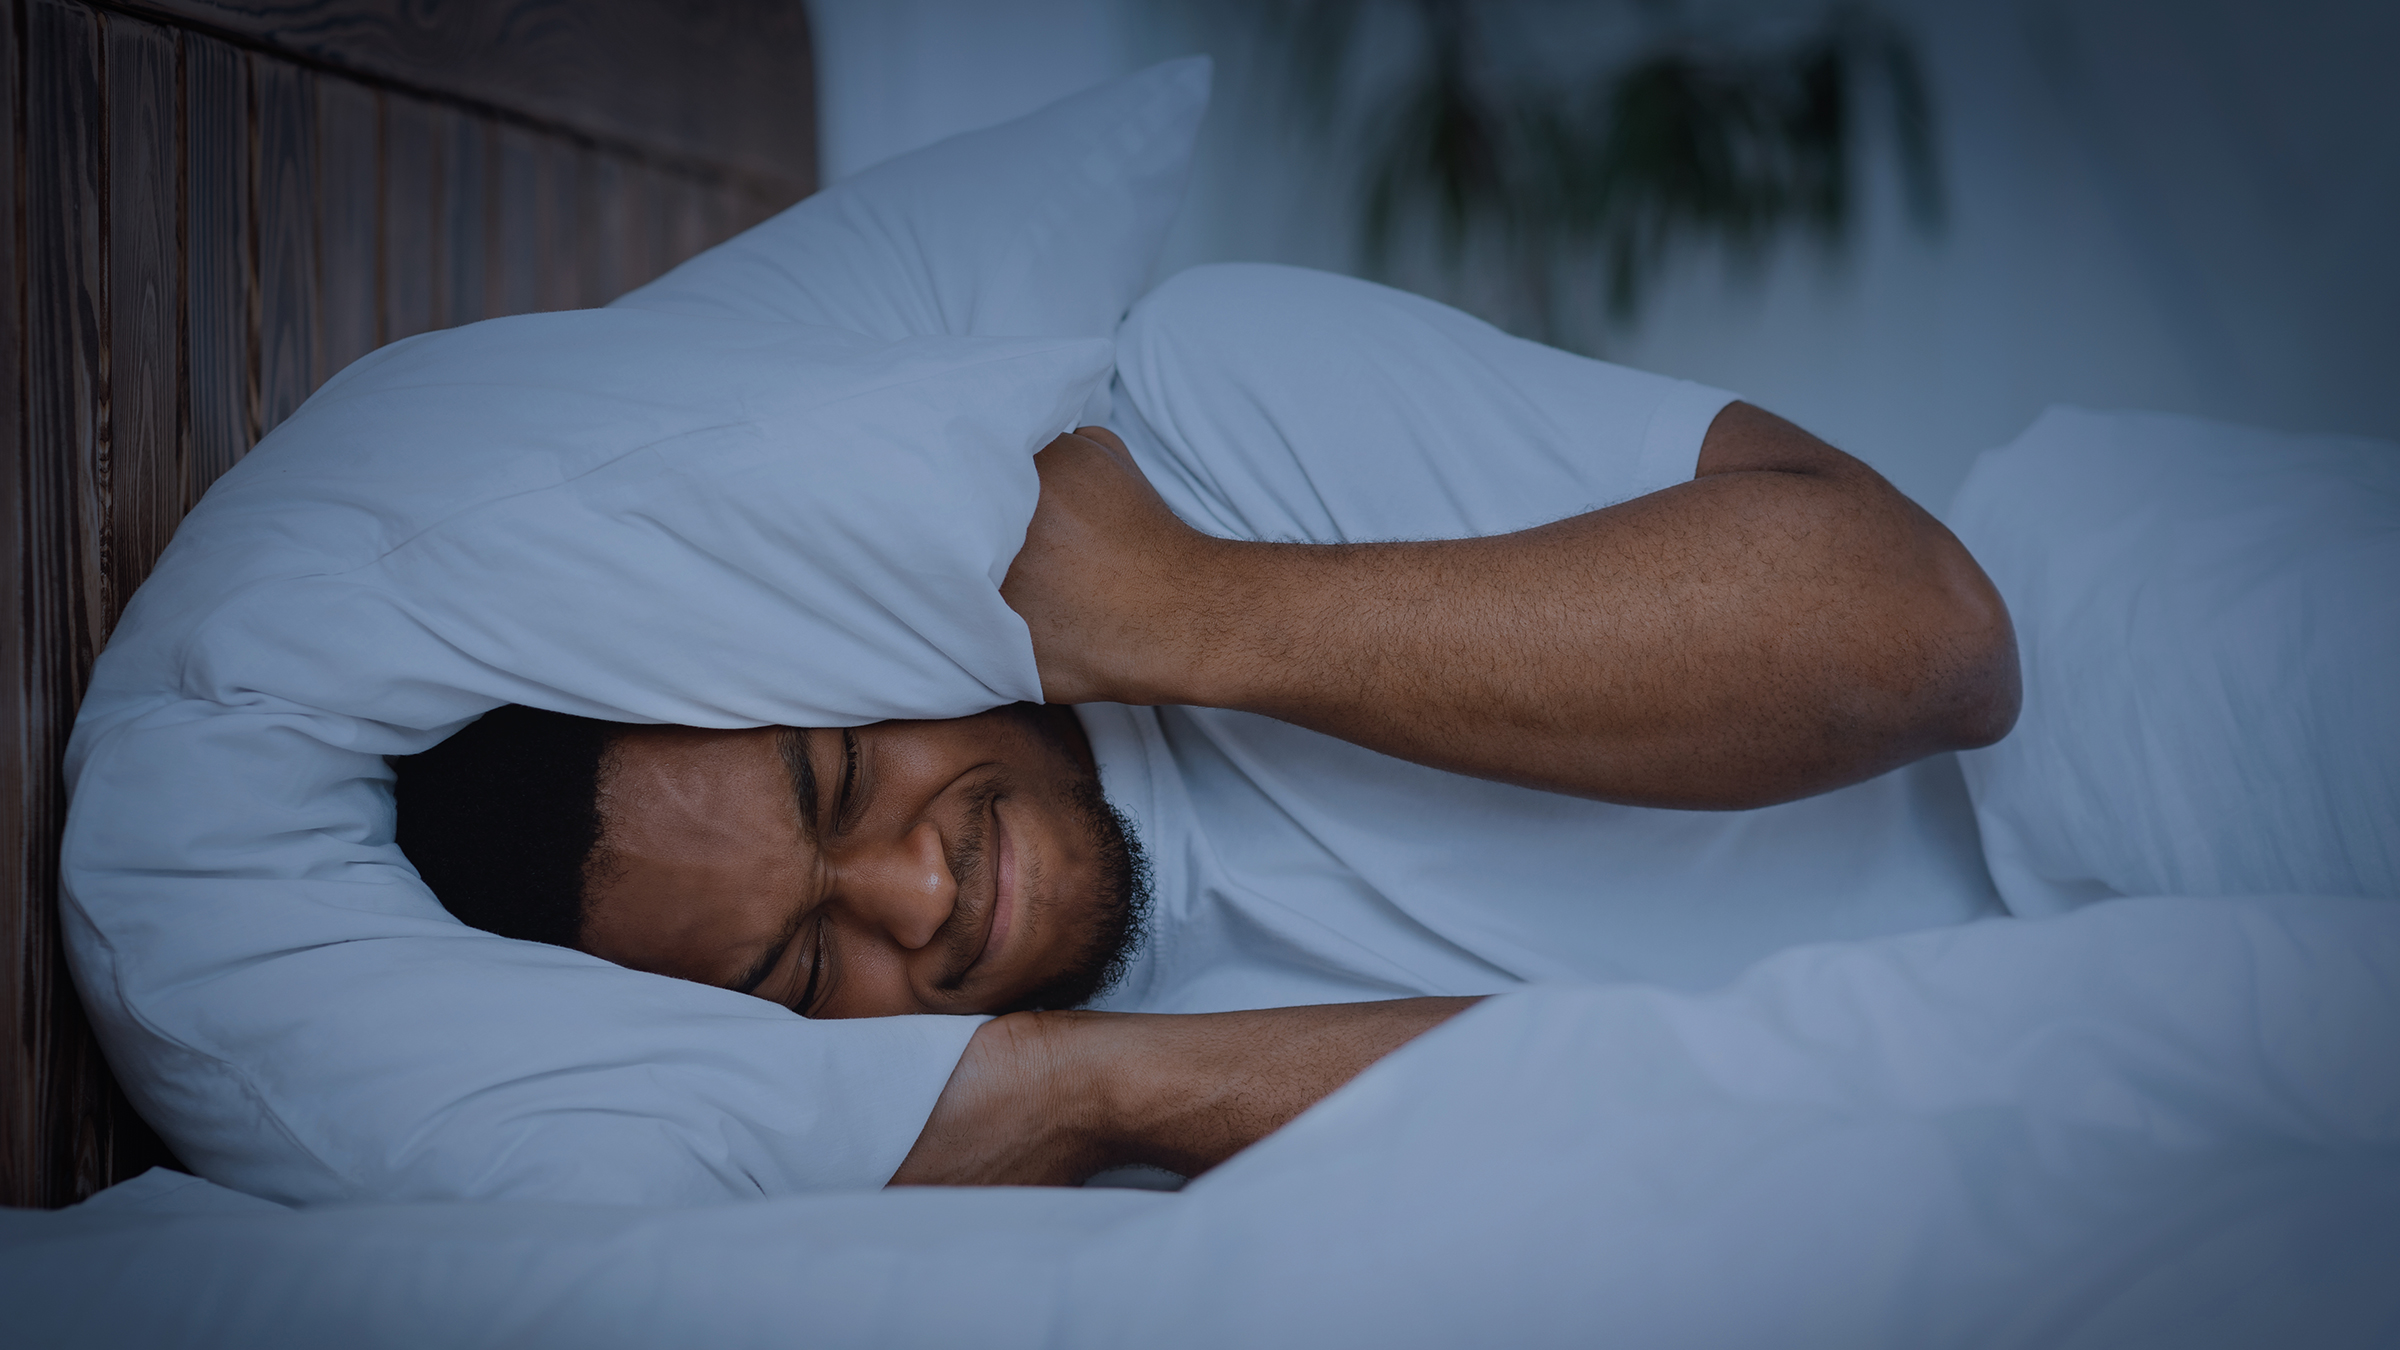 How to sleep with fans and avoid getting sick or aggravating allergies